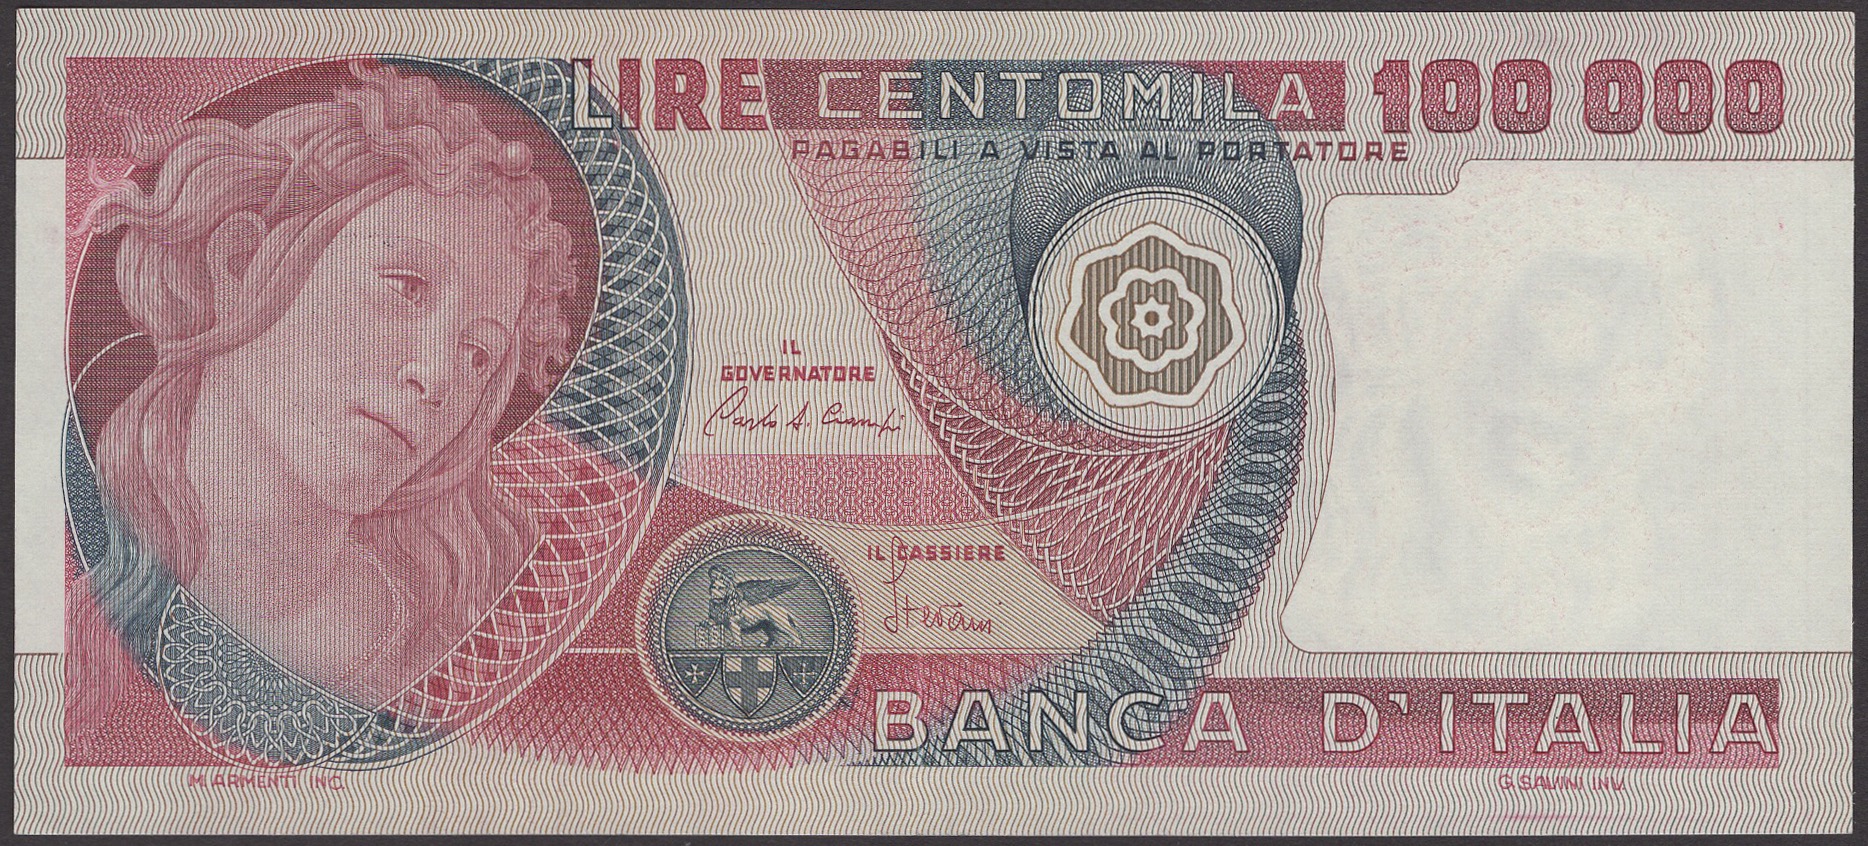 Banca d'Italia, 100000 Lire, 1980, serial number CA475427N, central fold, thus about...